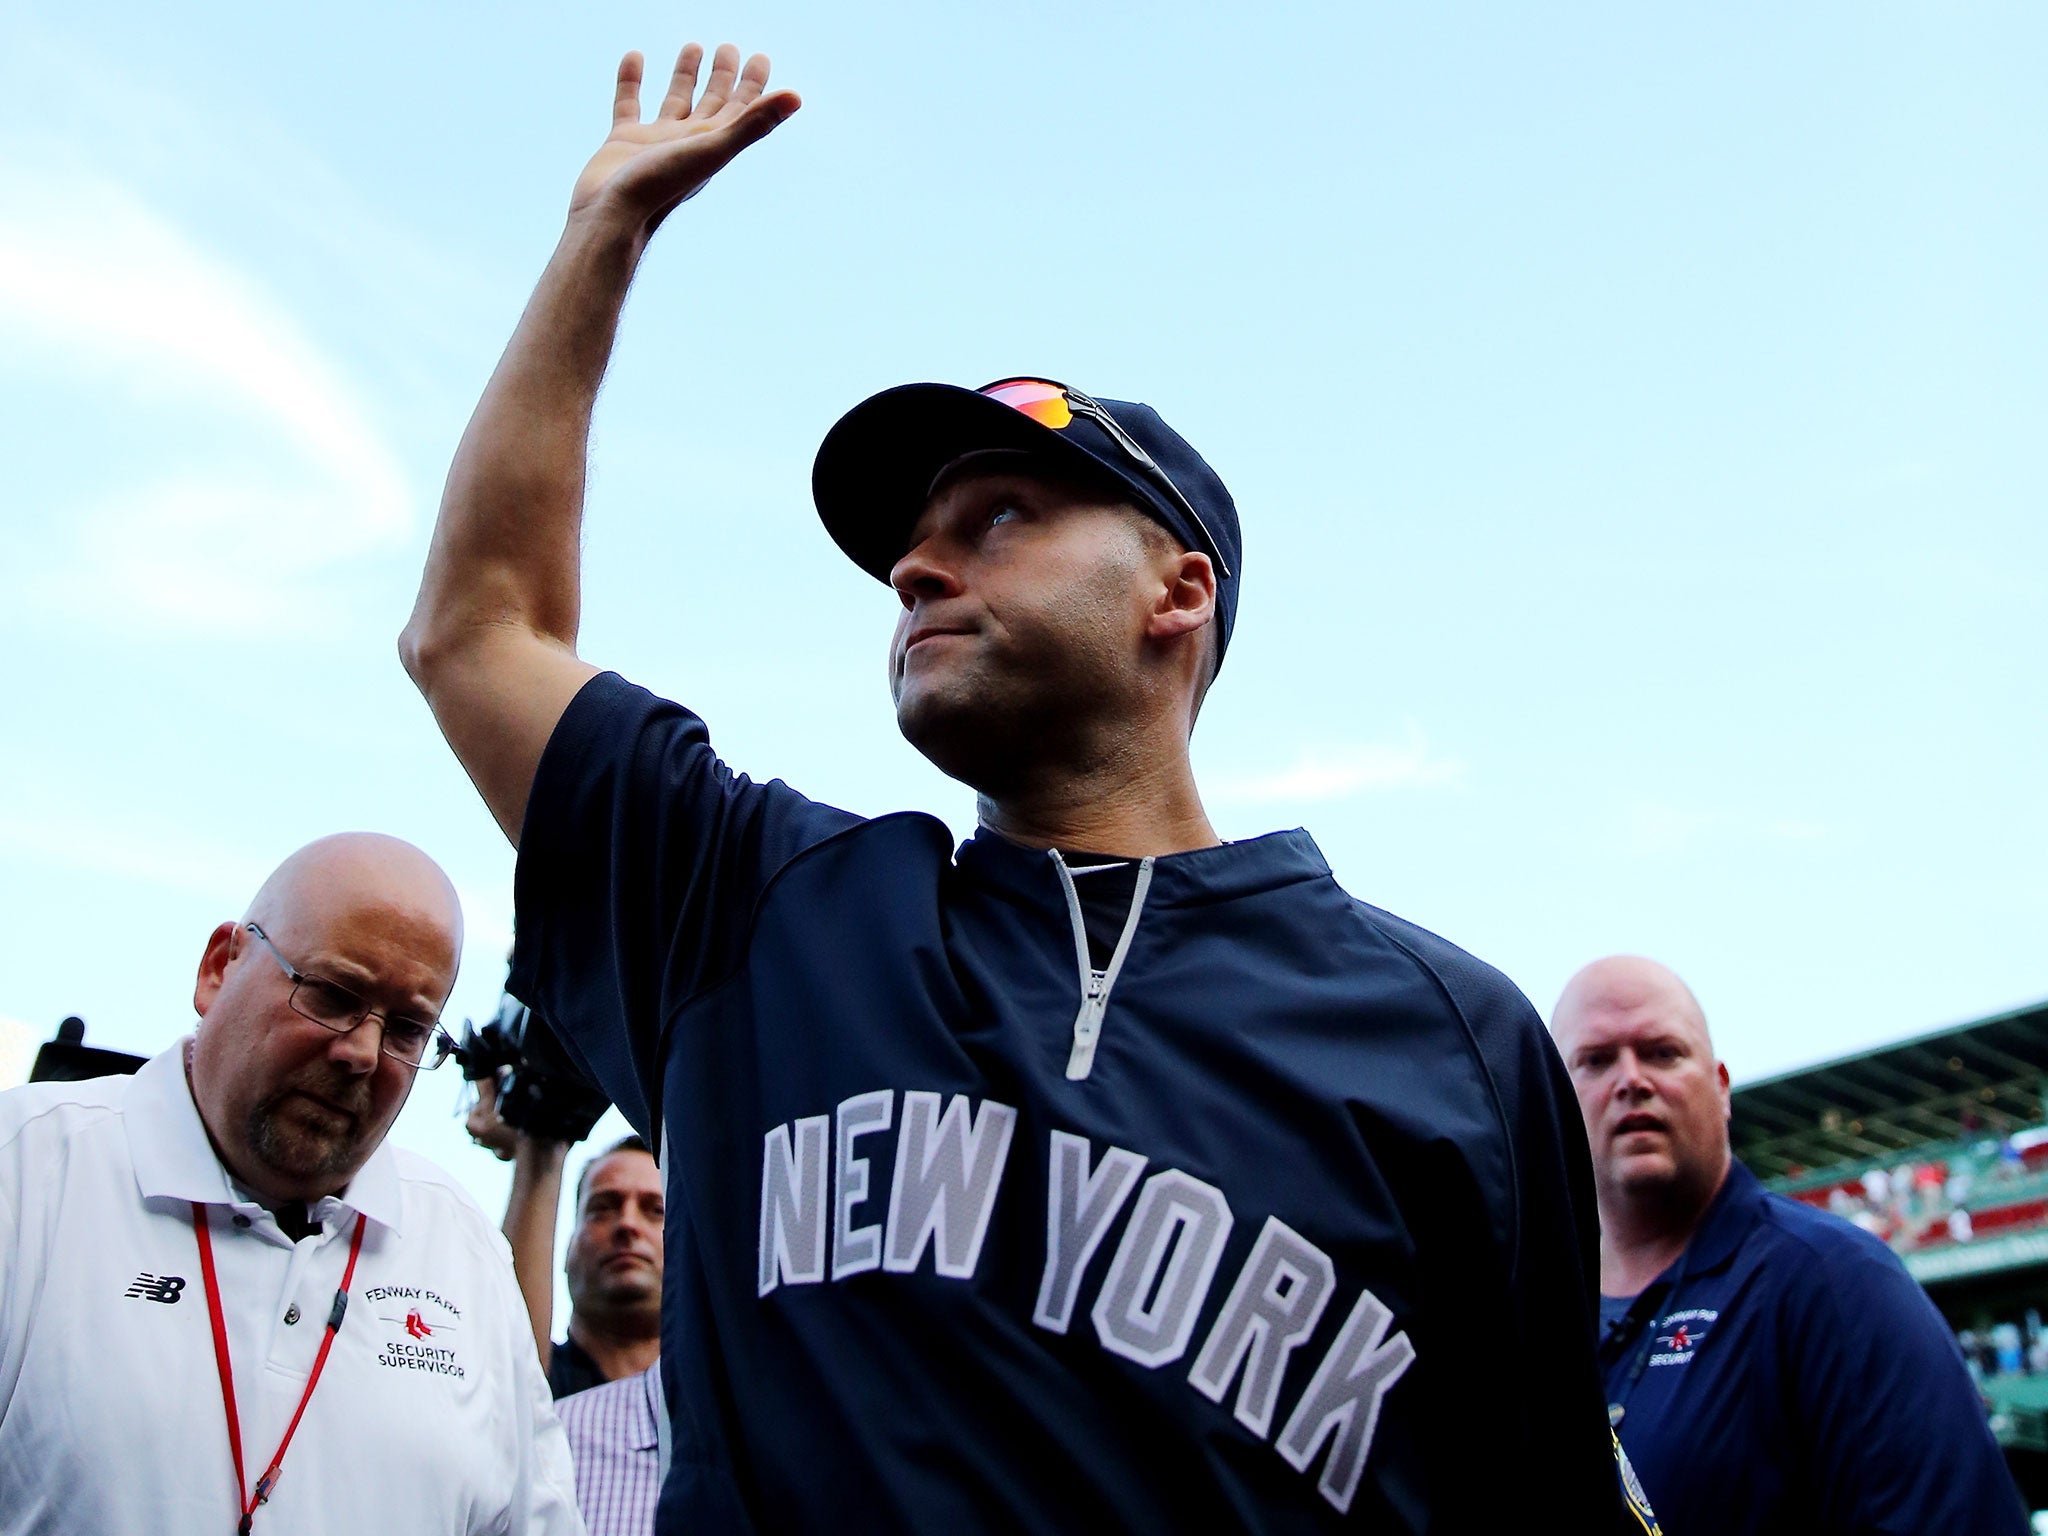 Derek Jeter waves farewell to the crowd upon his retirement